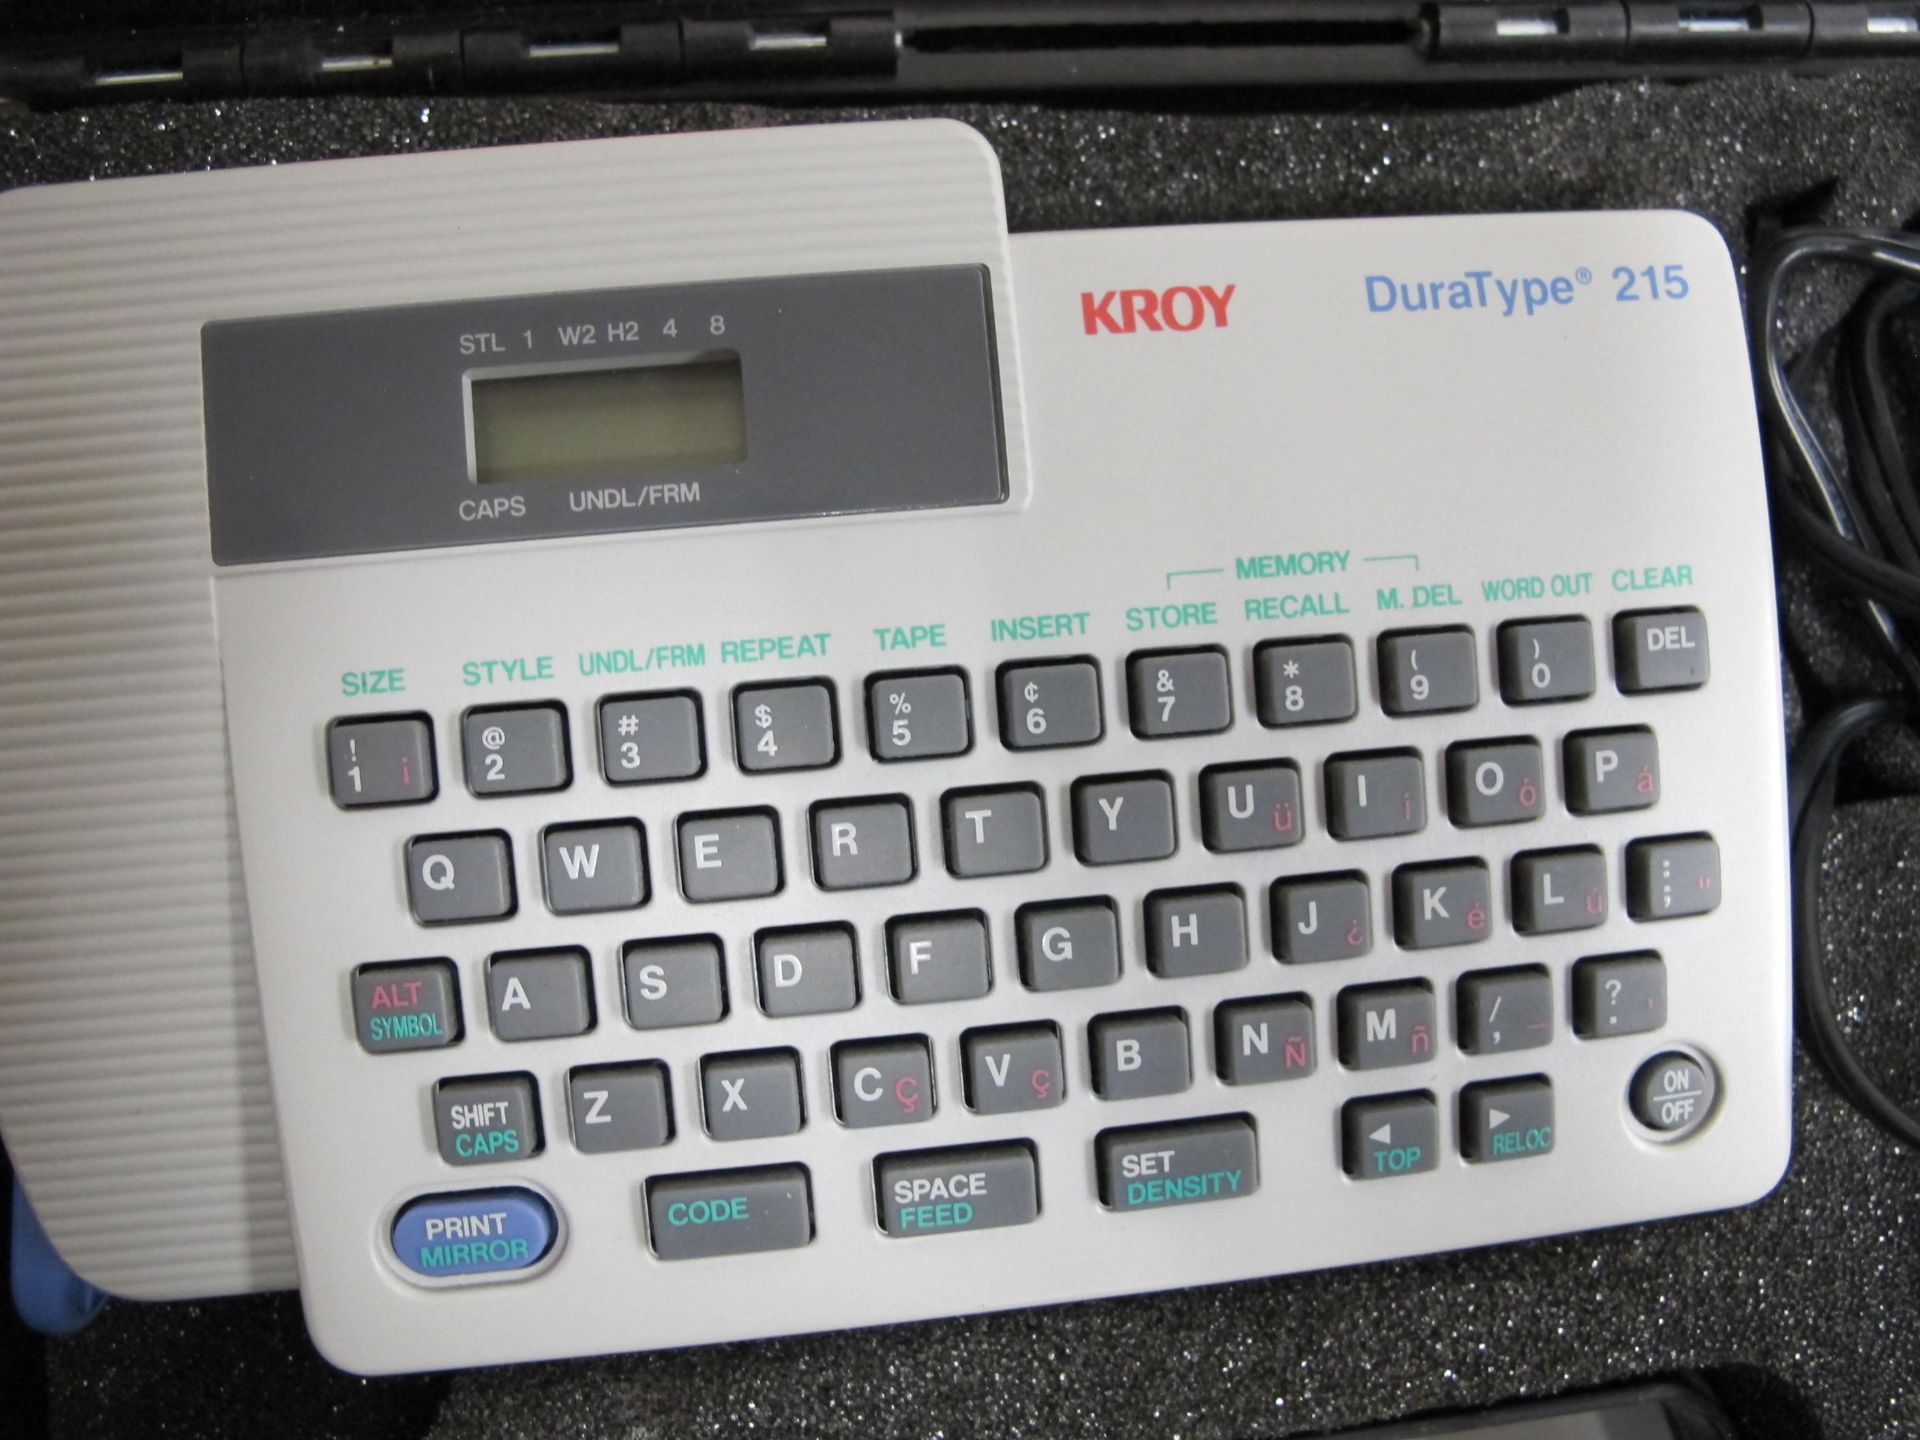 Kroy DuraType 215 Handheld Lable Maker with Charger & Carry Case - Image 2 of 3